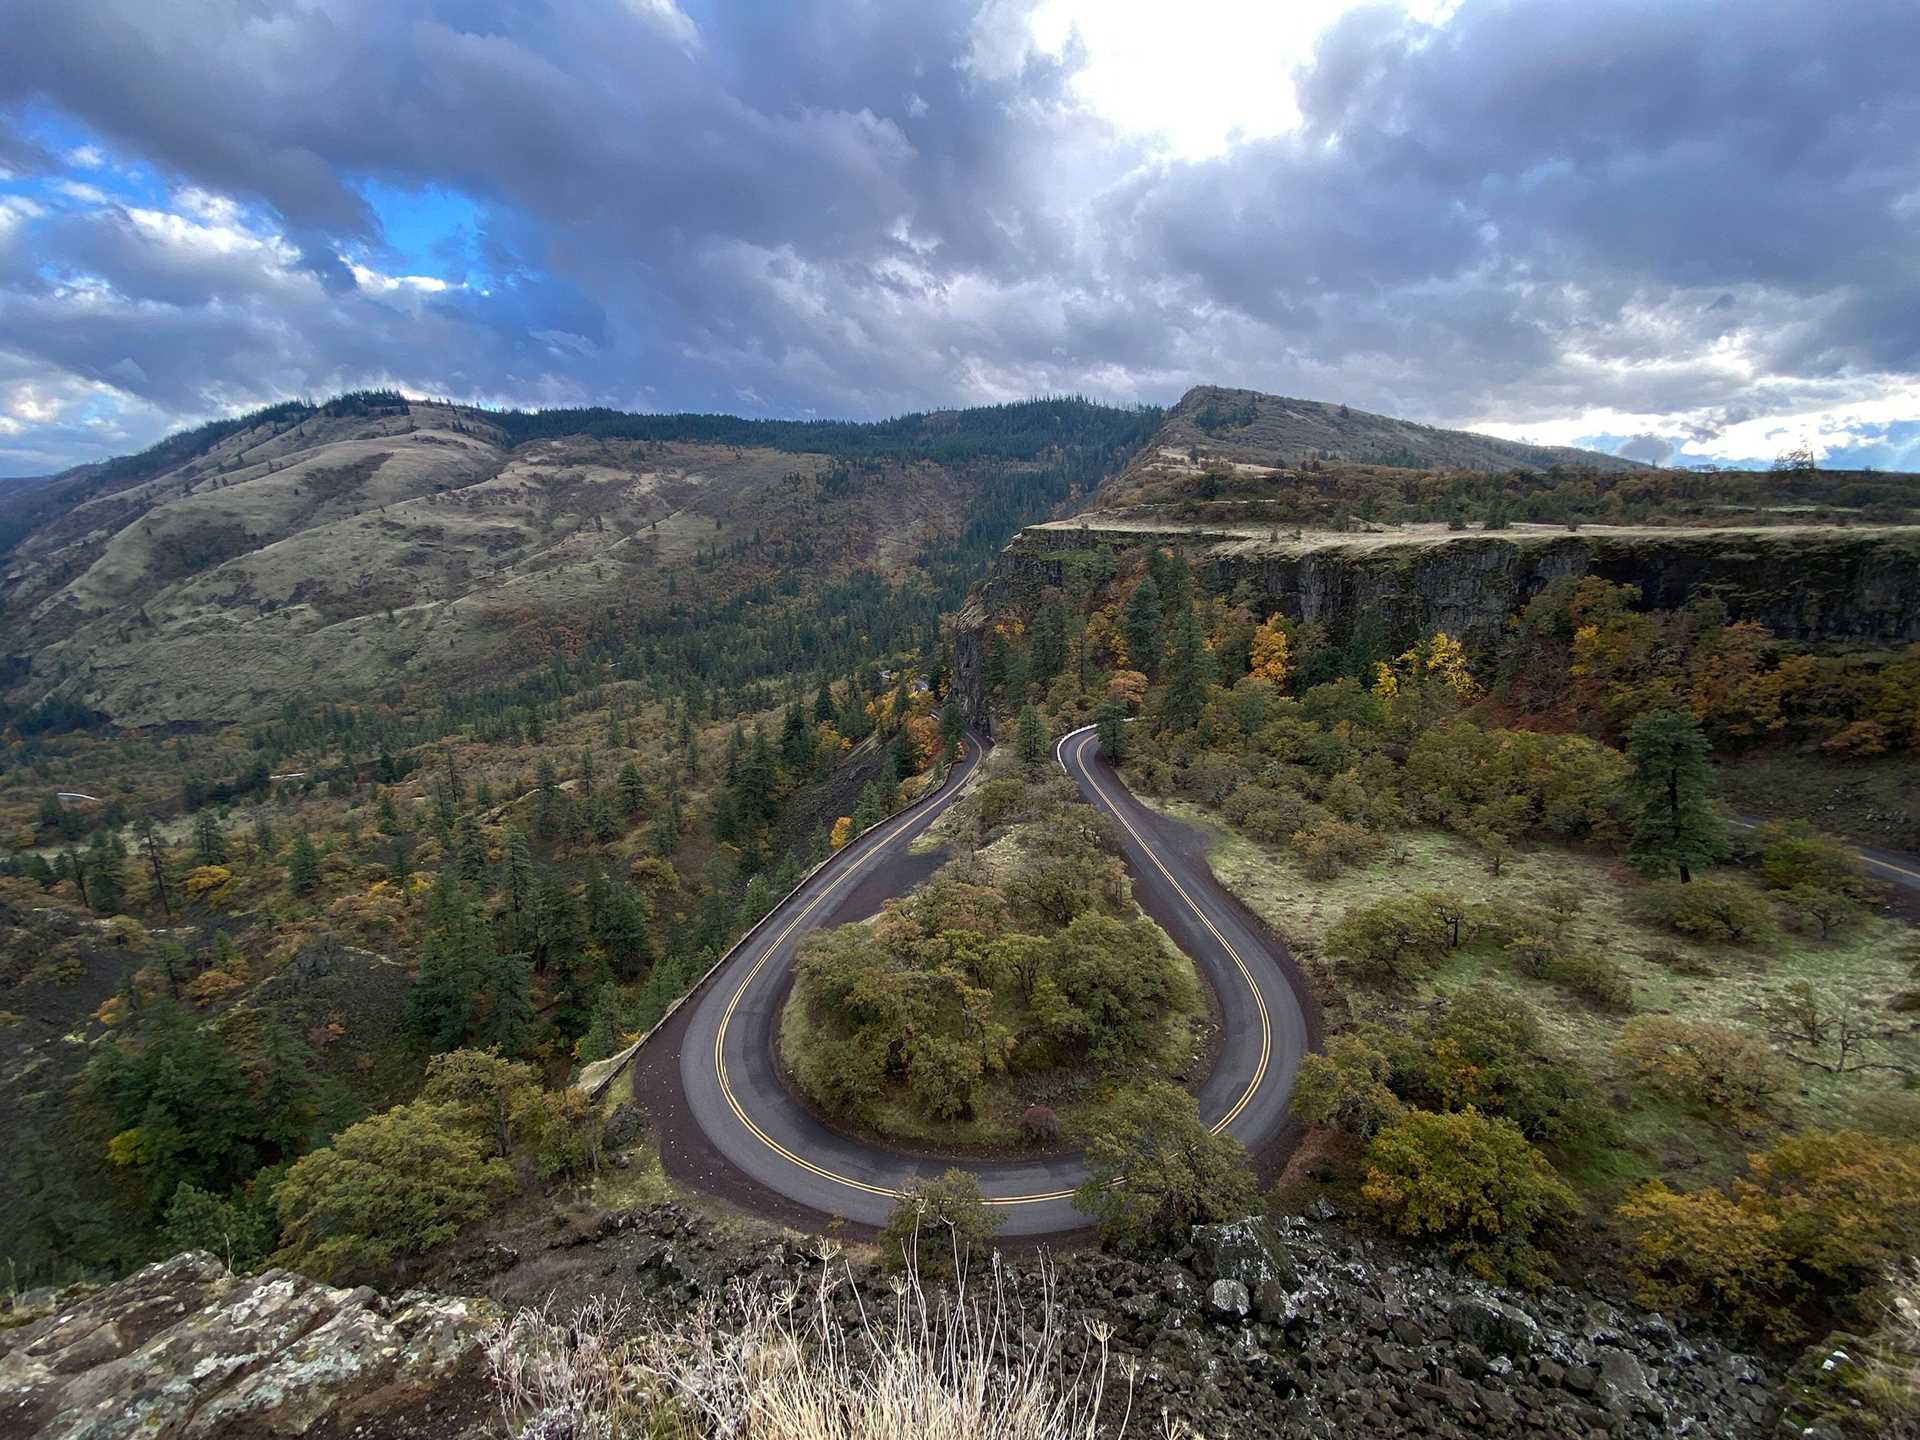 a view of the mountains at Rowena Crest, with a hairpin highway curve visible in the foreground